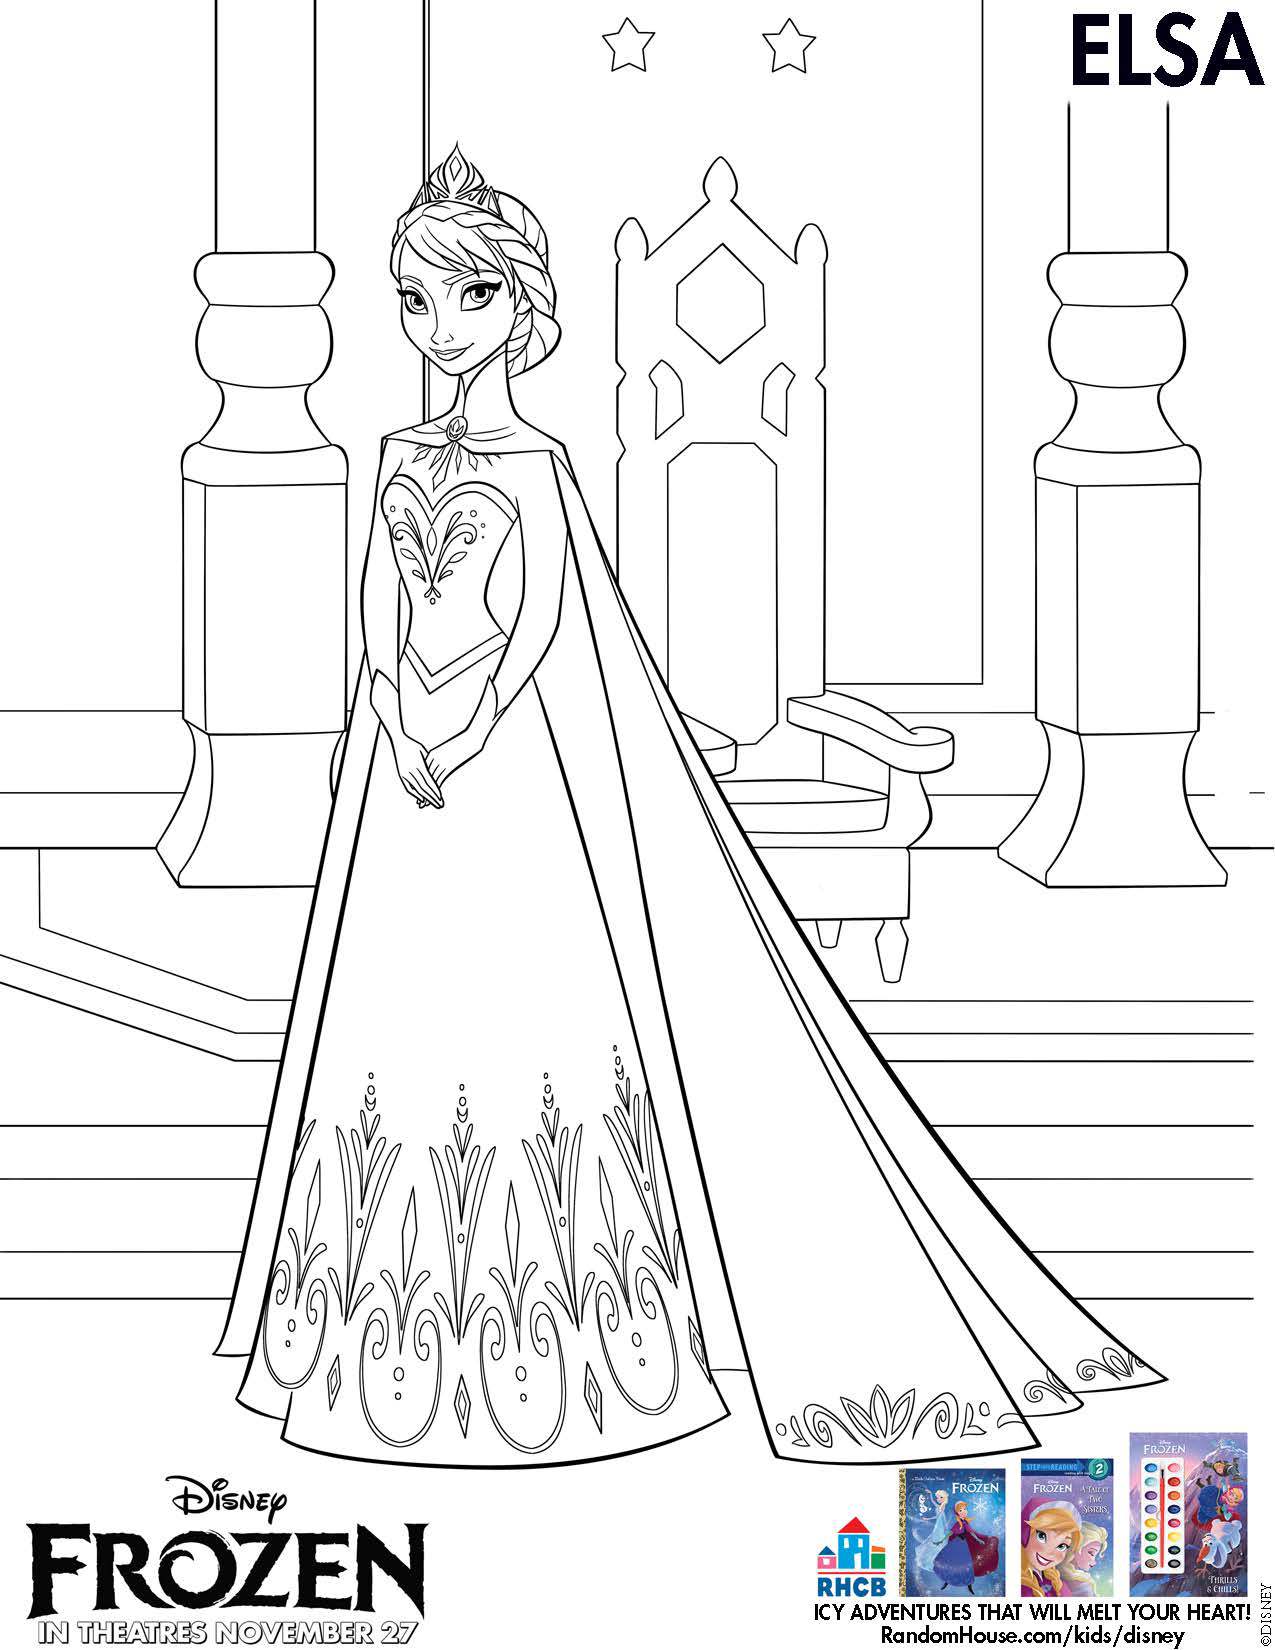 Free Frozen Coloring Pages , Download Free Frozen Coloring Pages ...